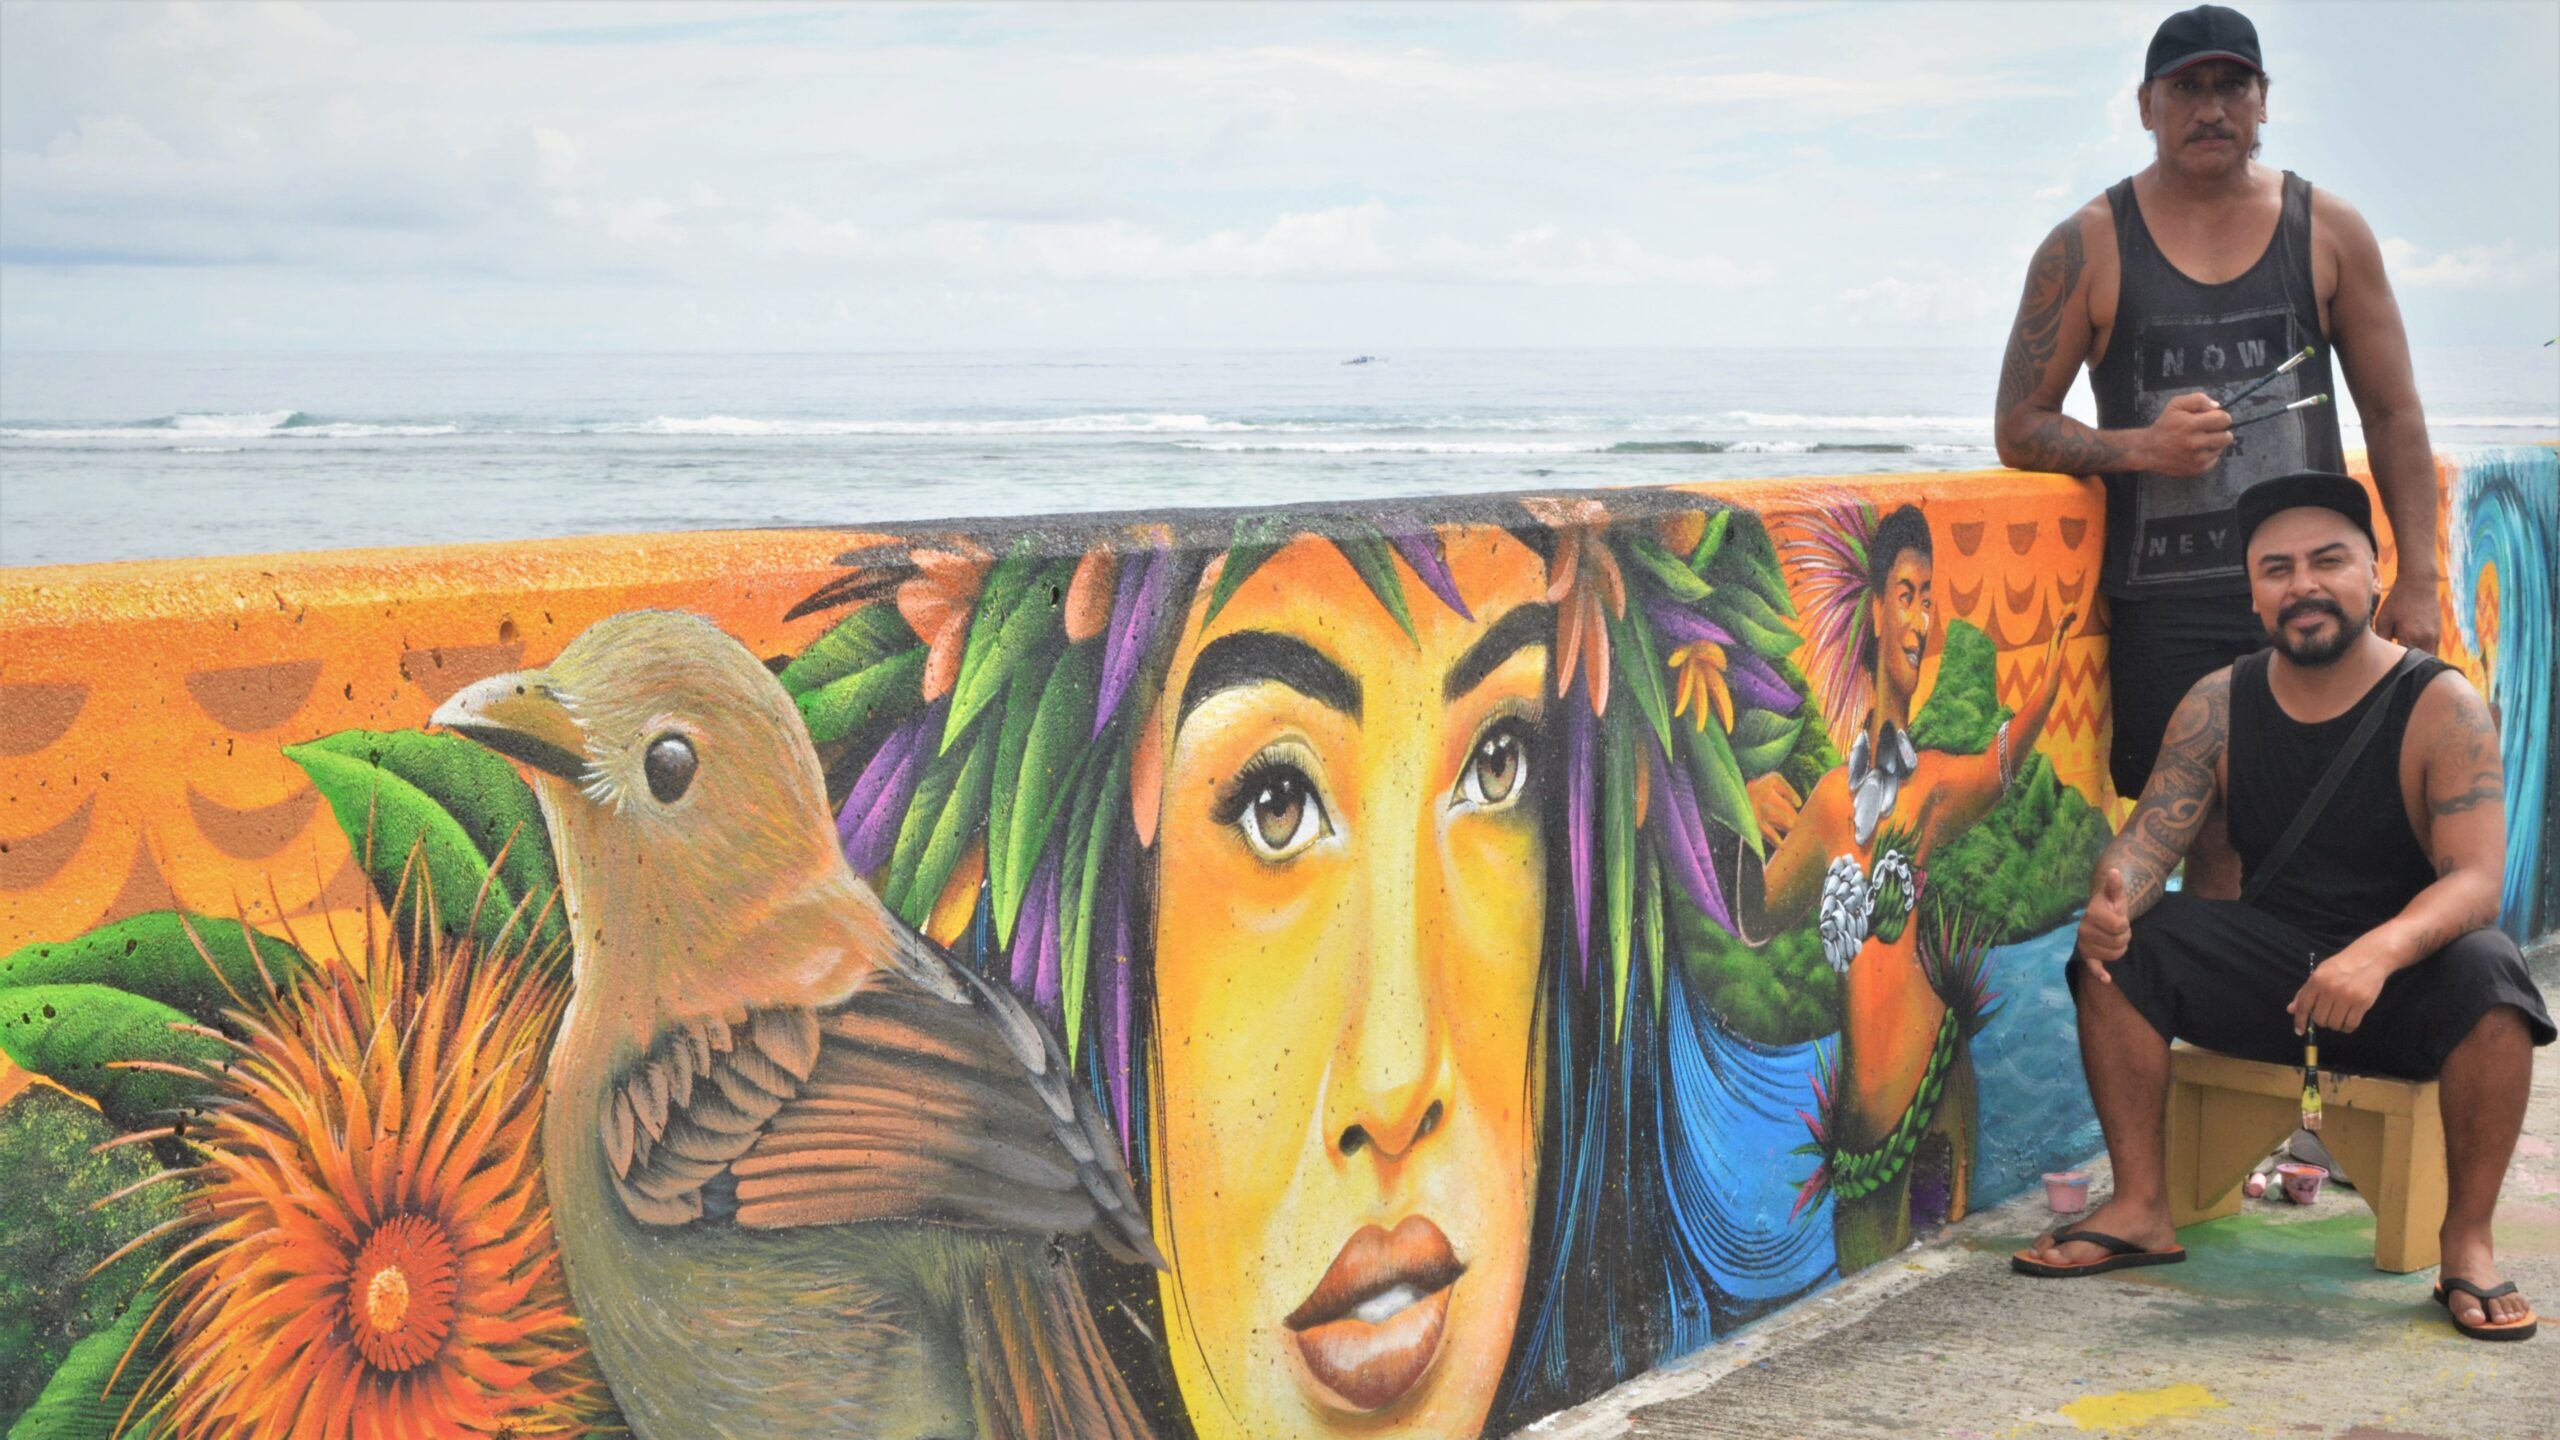 Nikao Seawall Mural Continues To Delight – Cook Islands News Regarding The Seawall Art (View 8 of 15)